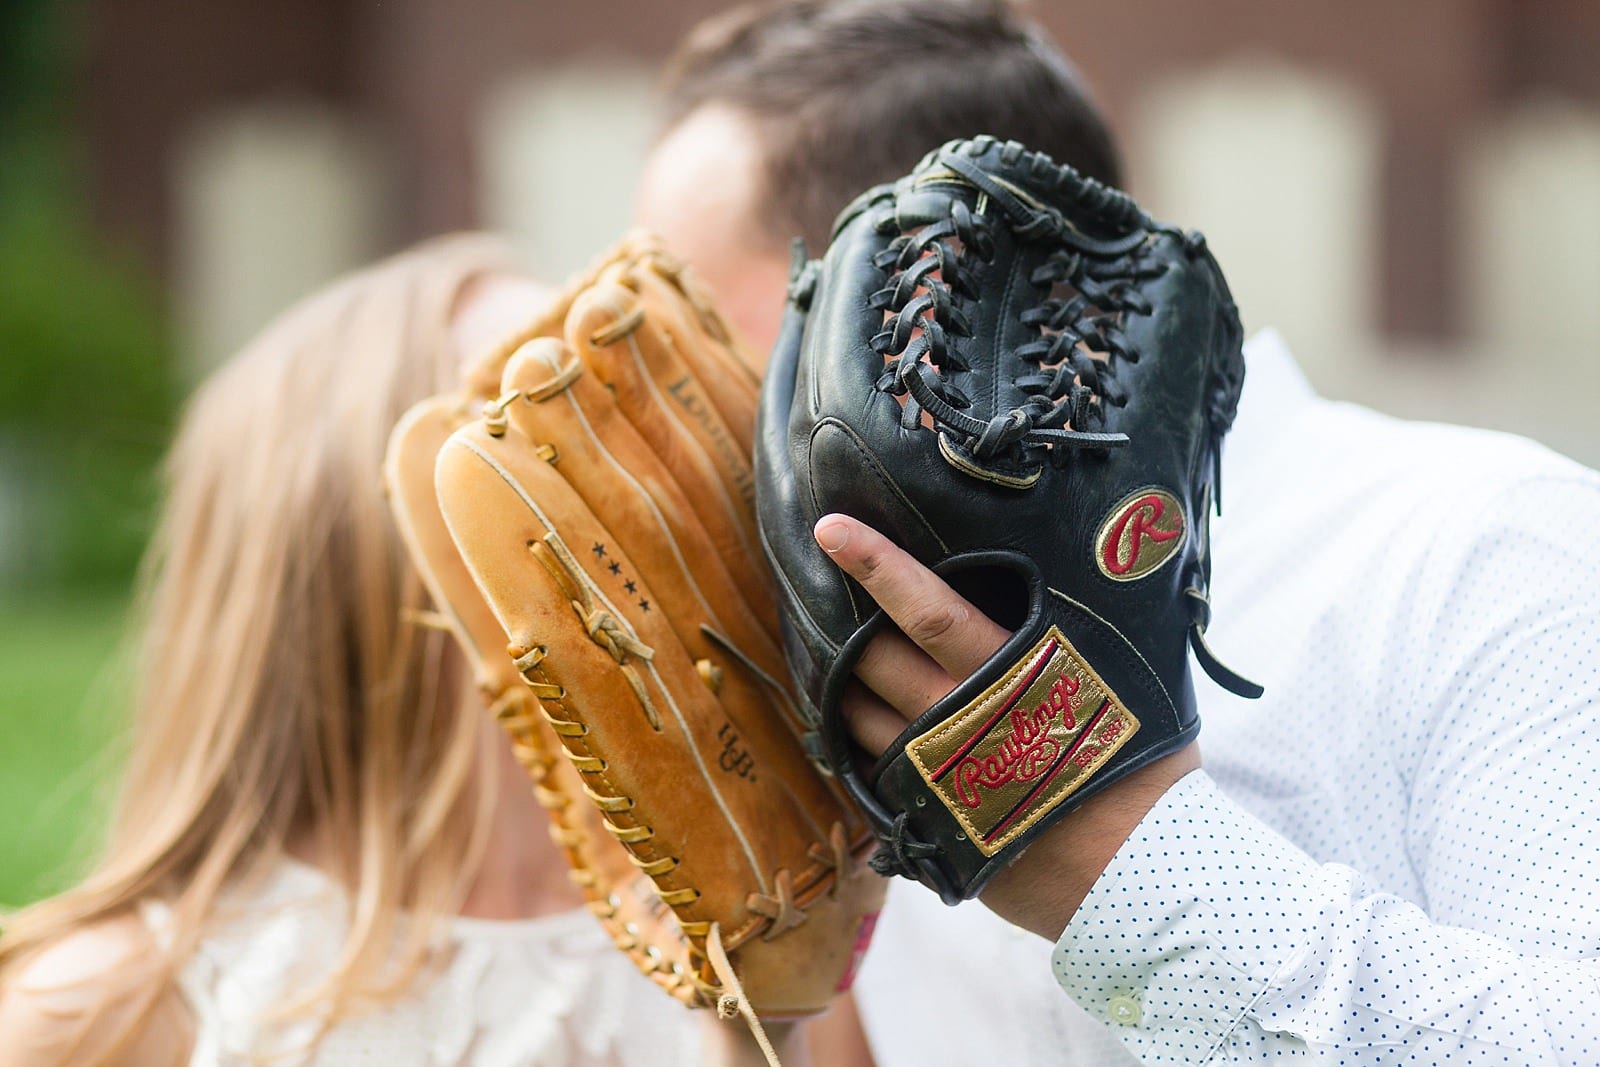 Baseball mitts, hidden kiss, intimate engagement portrait, athletic couple